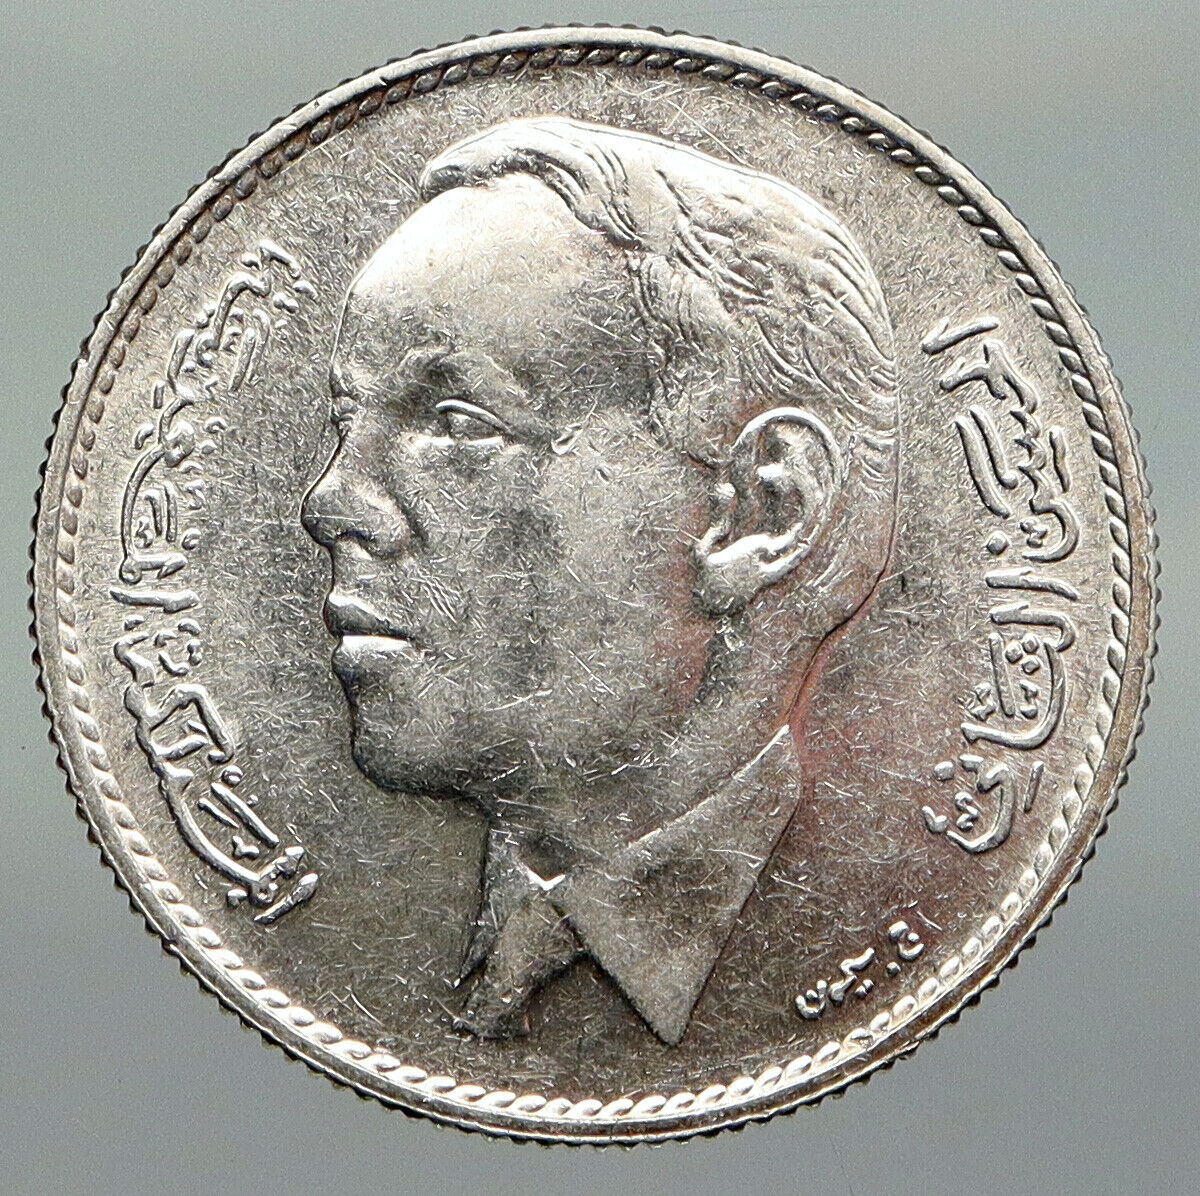 1965 Morocco Hassan Ii Lions Star Vintage Antique Silver 5 Dirhams Coin I91264